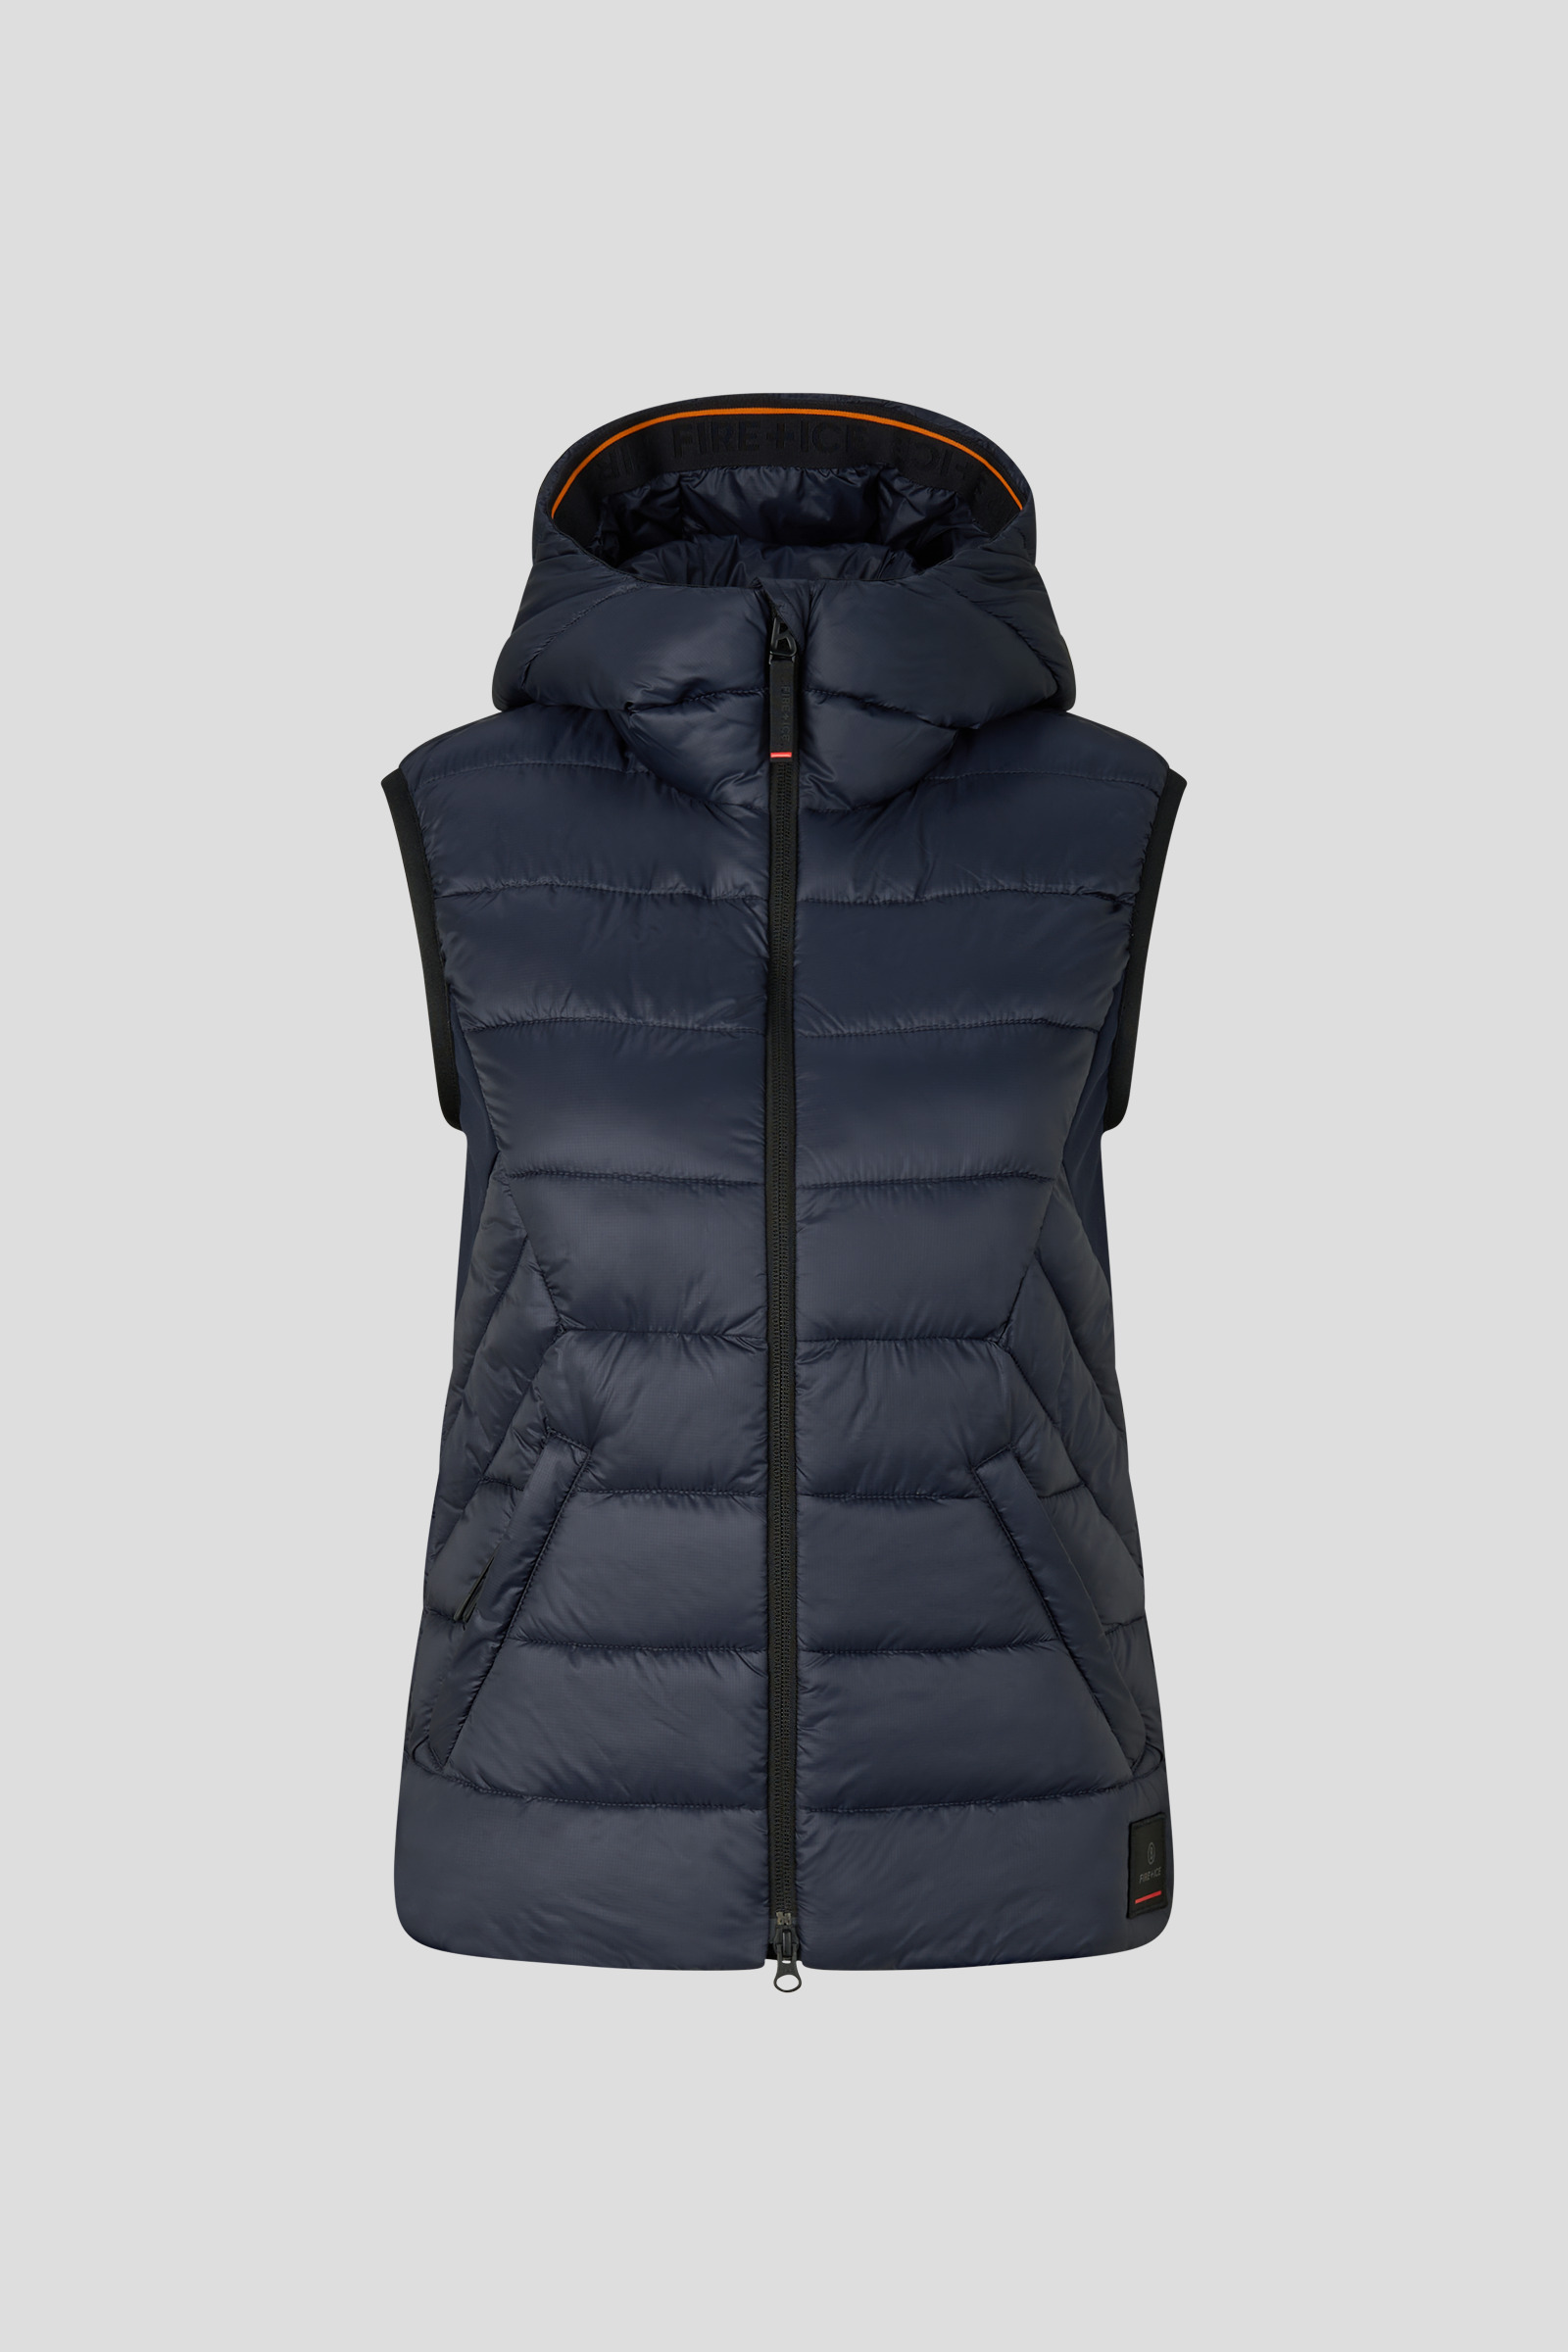 gilet for Karyn women FIRE+ICE Quilted